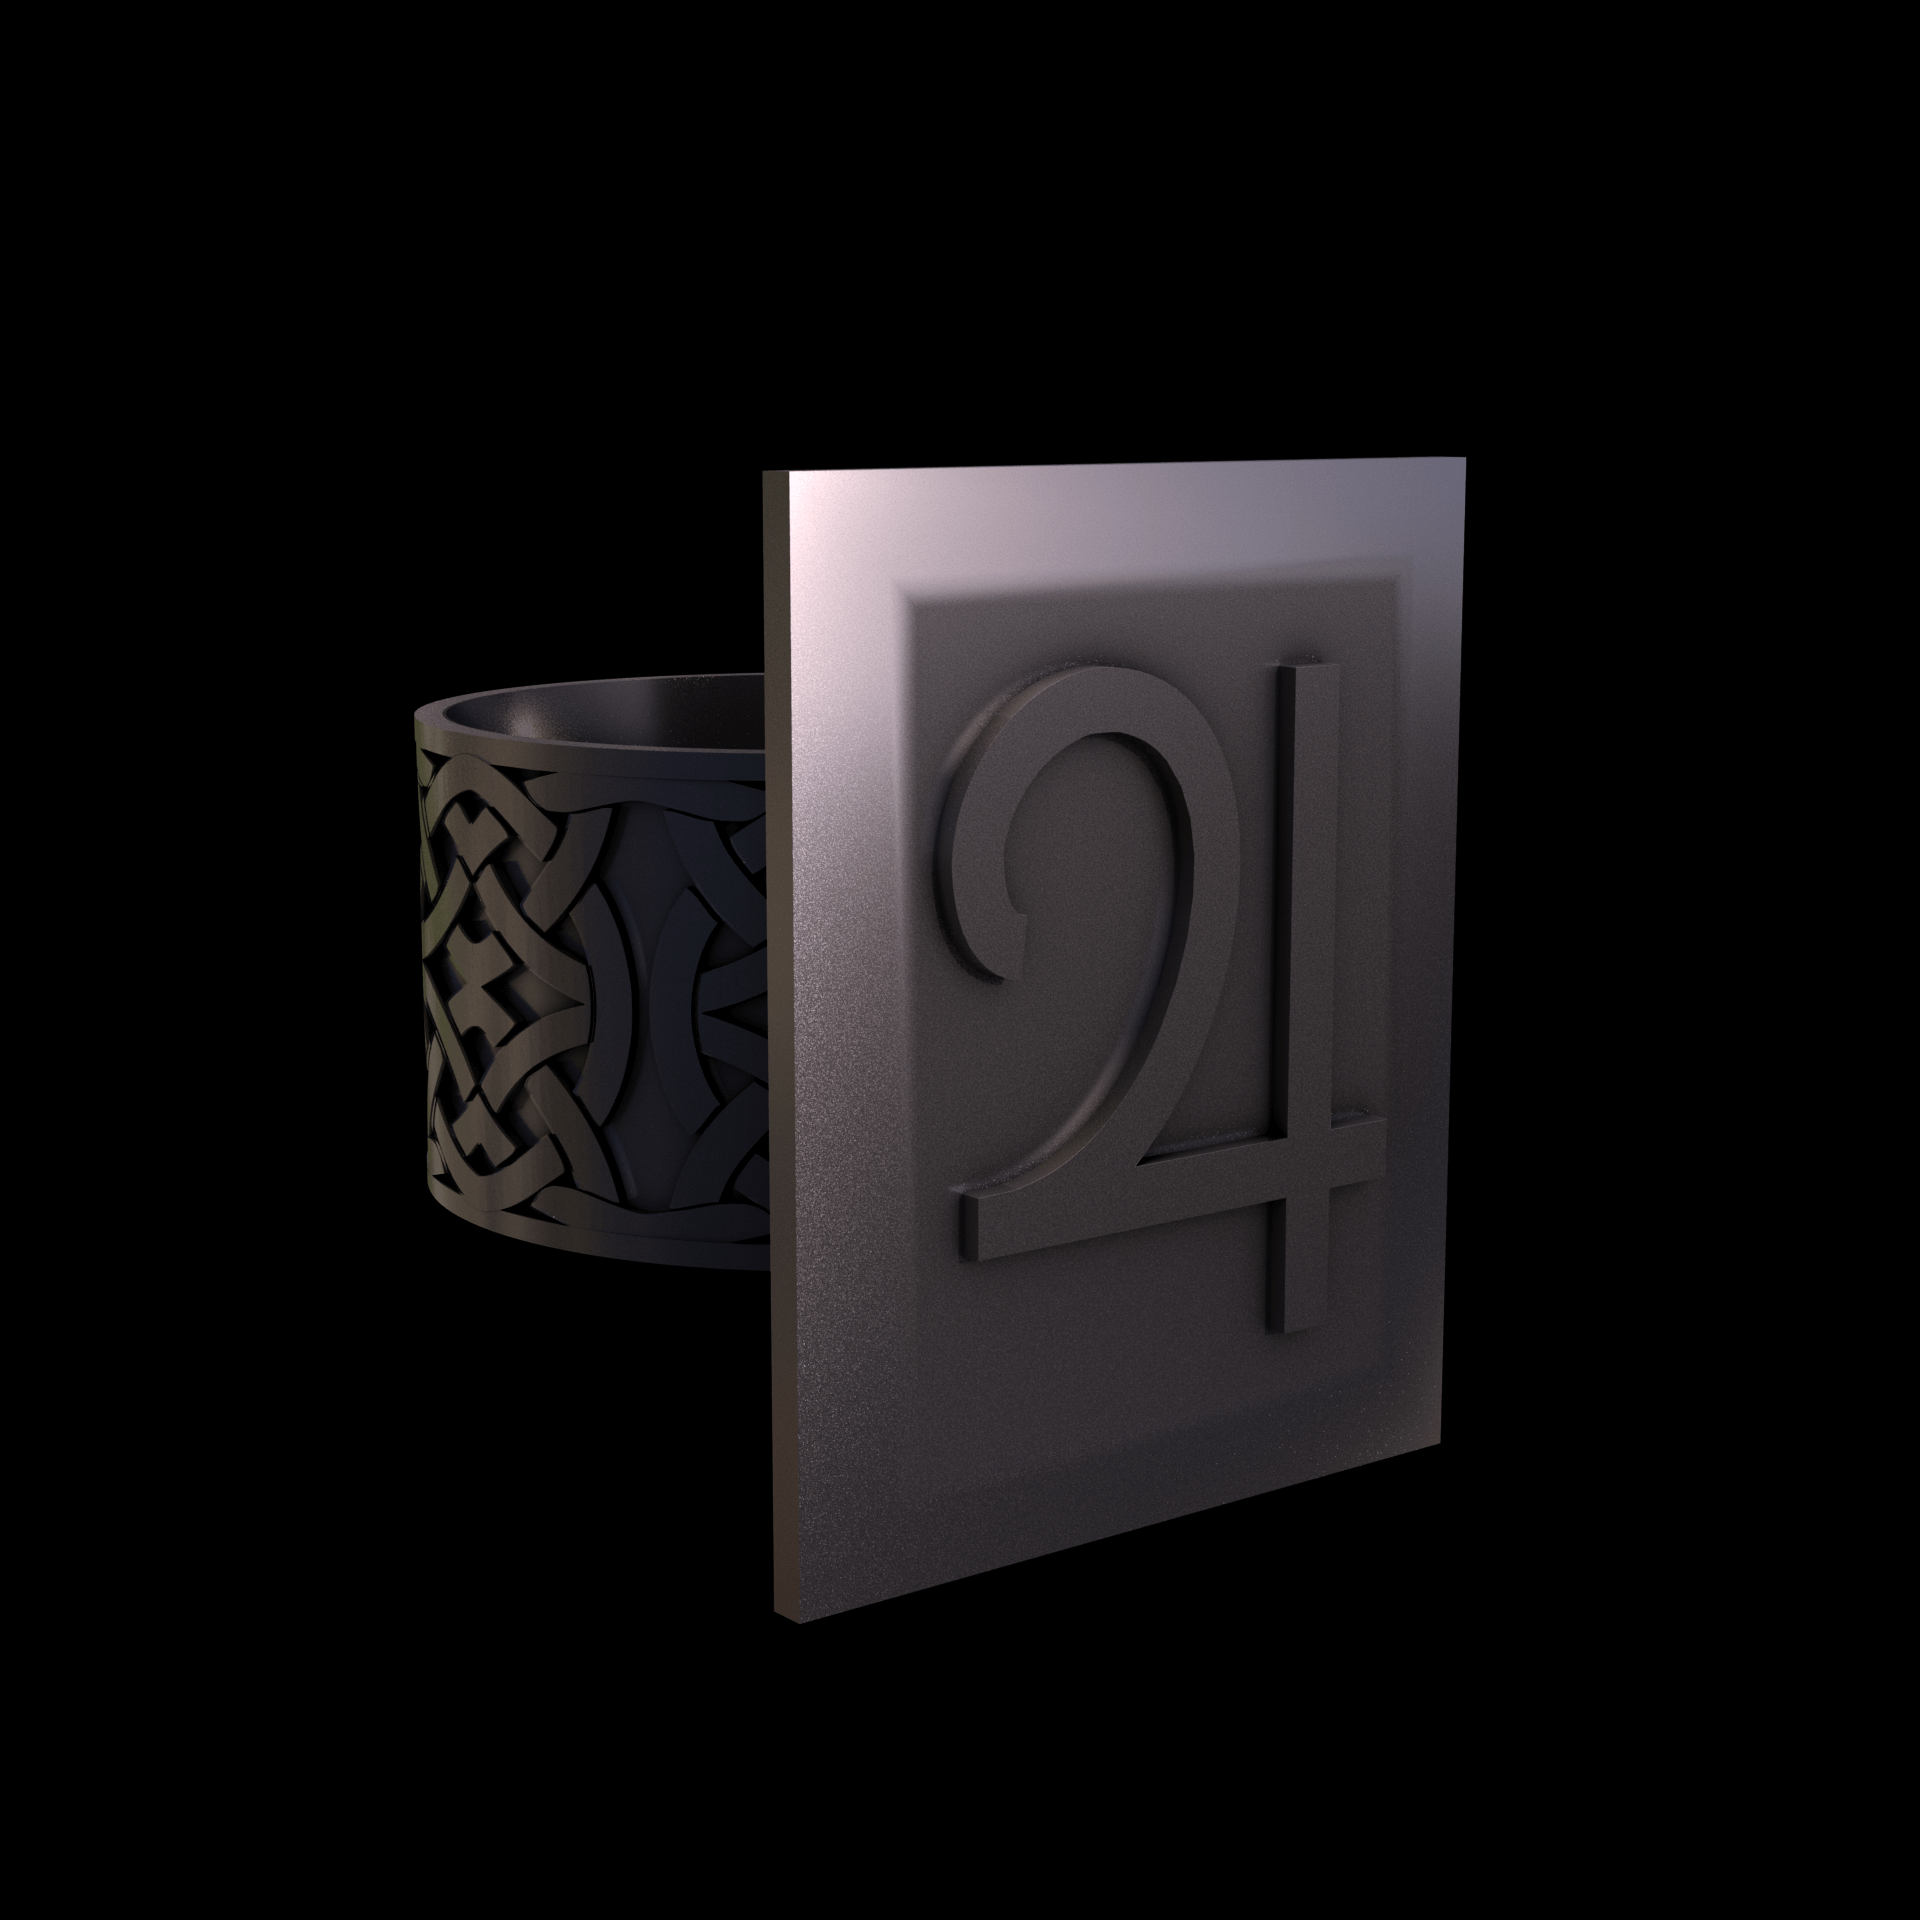 Bronze infused 420 stainless steel, manufactured using 3D printing, polished and plated in nickel for a silvery hue with a mild sheen, with visible print lines.